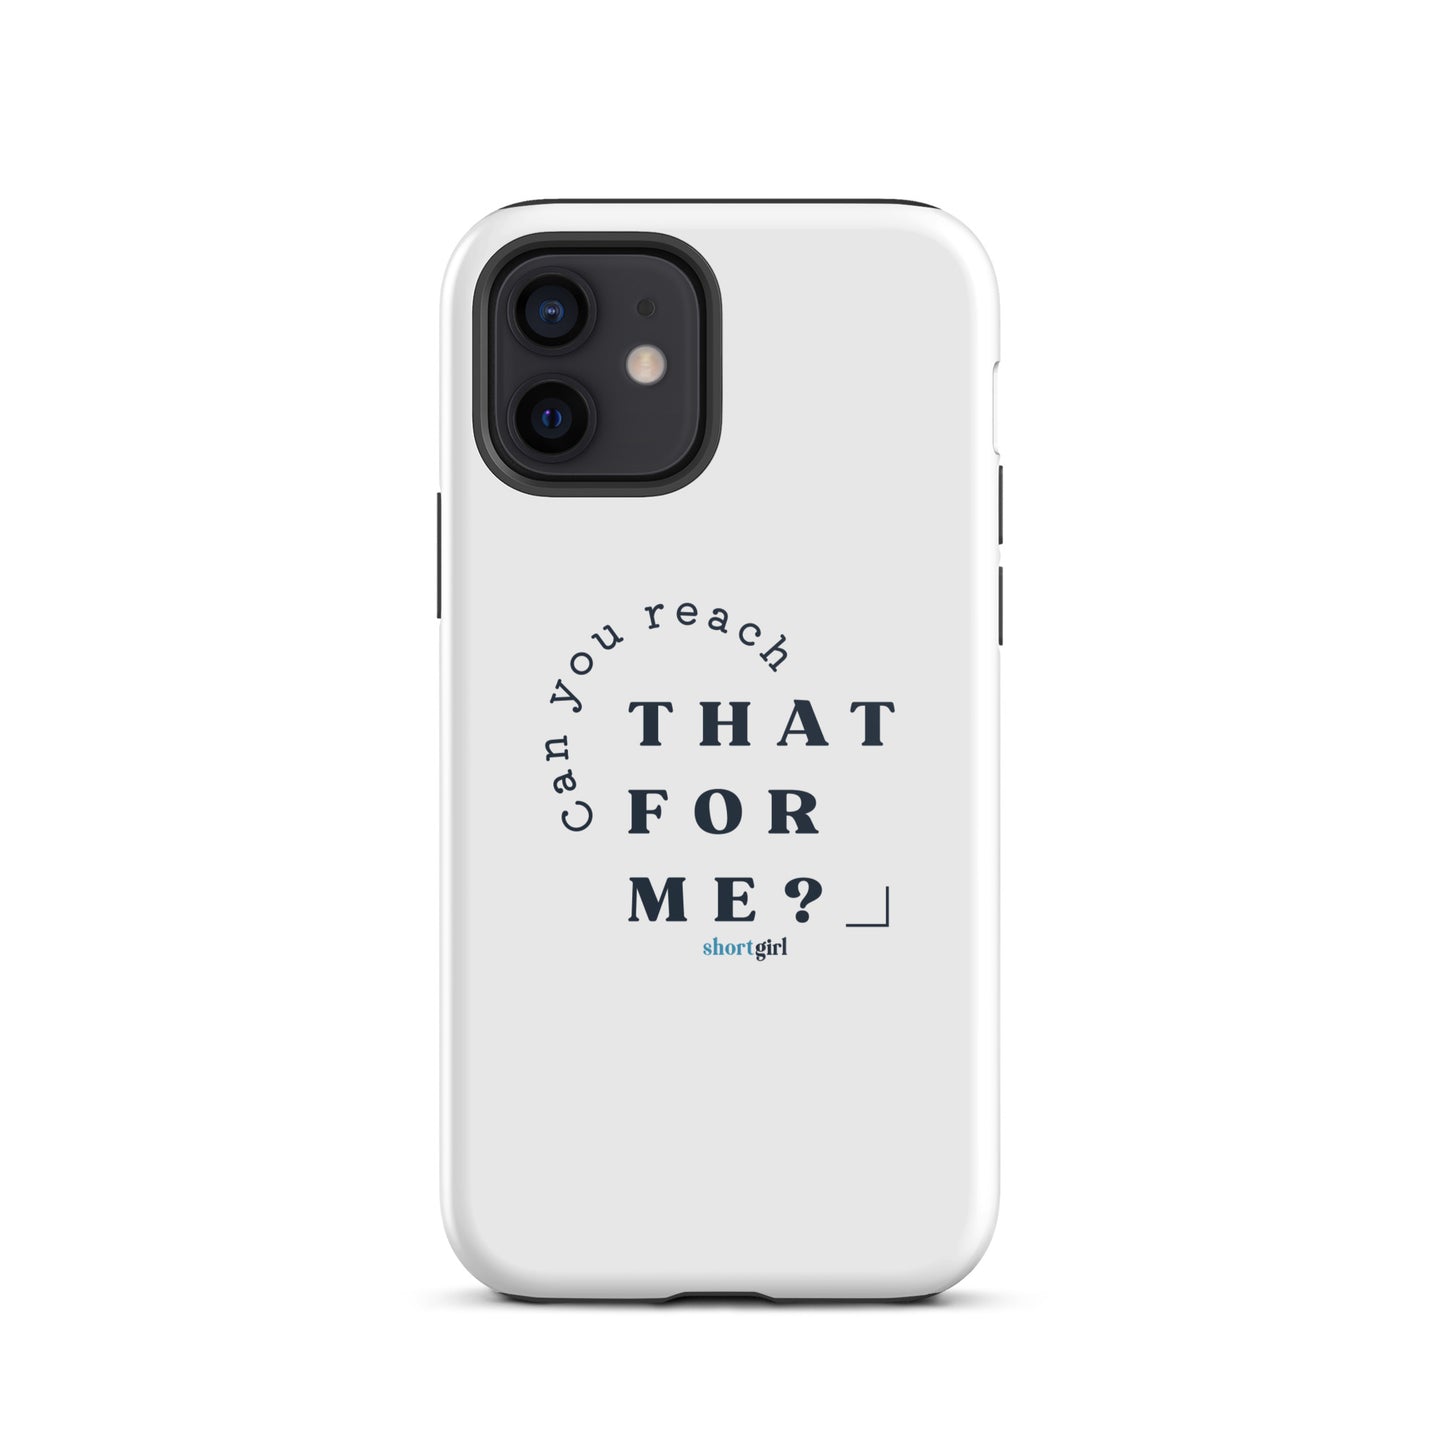 Tough iPhone case - Can you reach that for me?